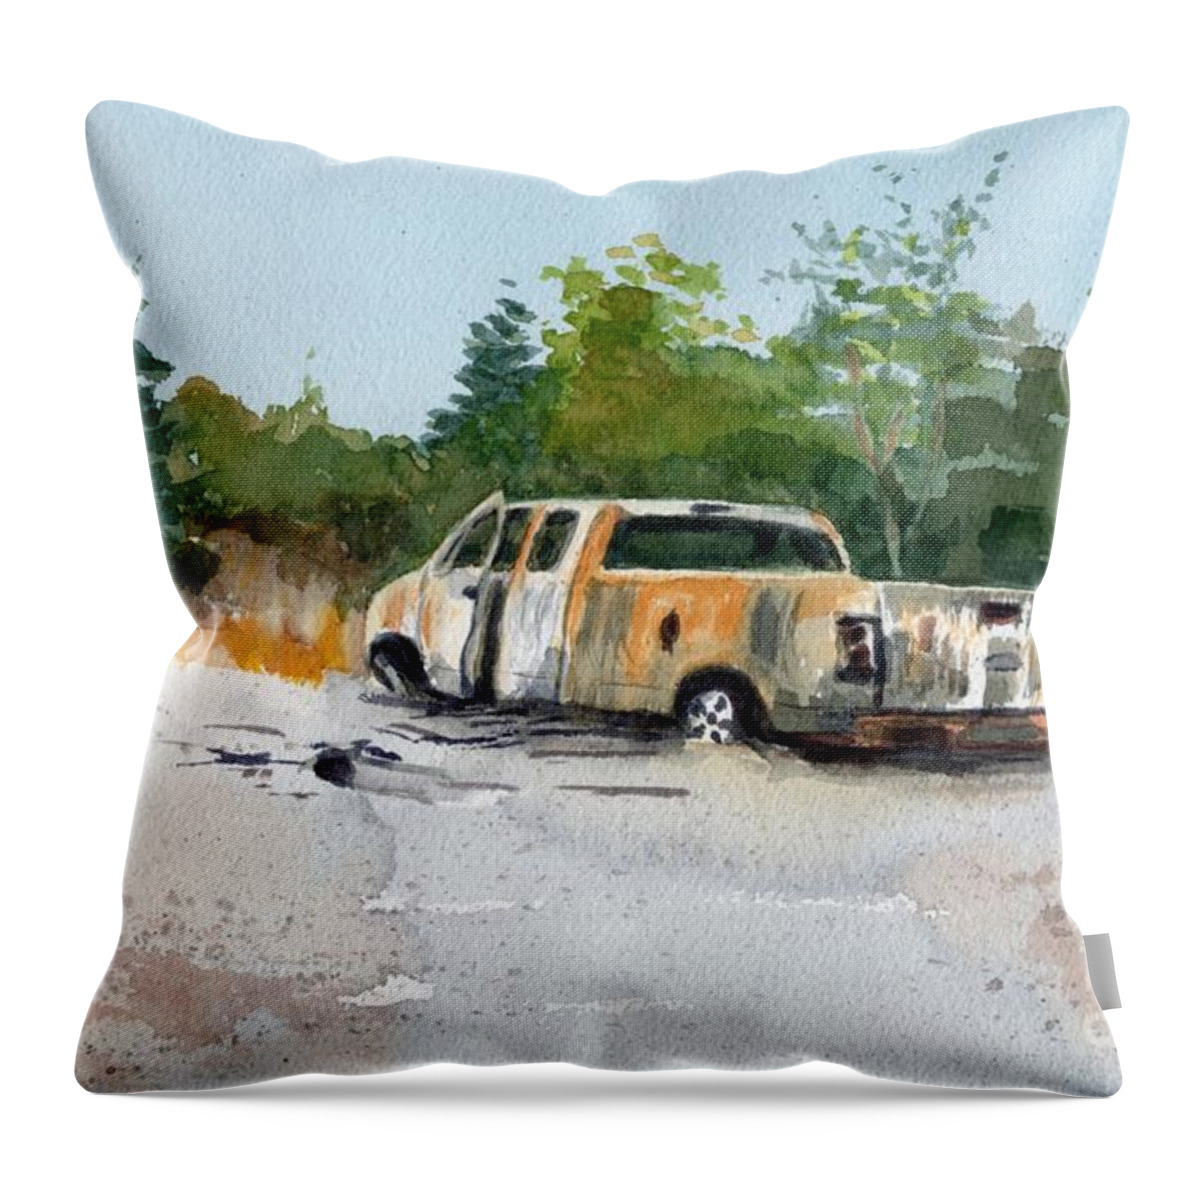 Rusty Truck Throw Pillow featuring the painting Road Kill by Vicki B Littell